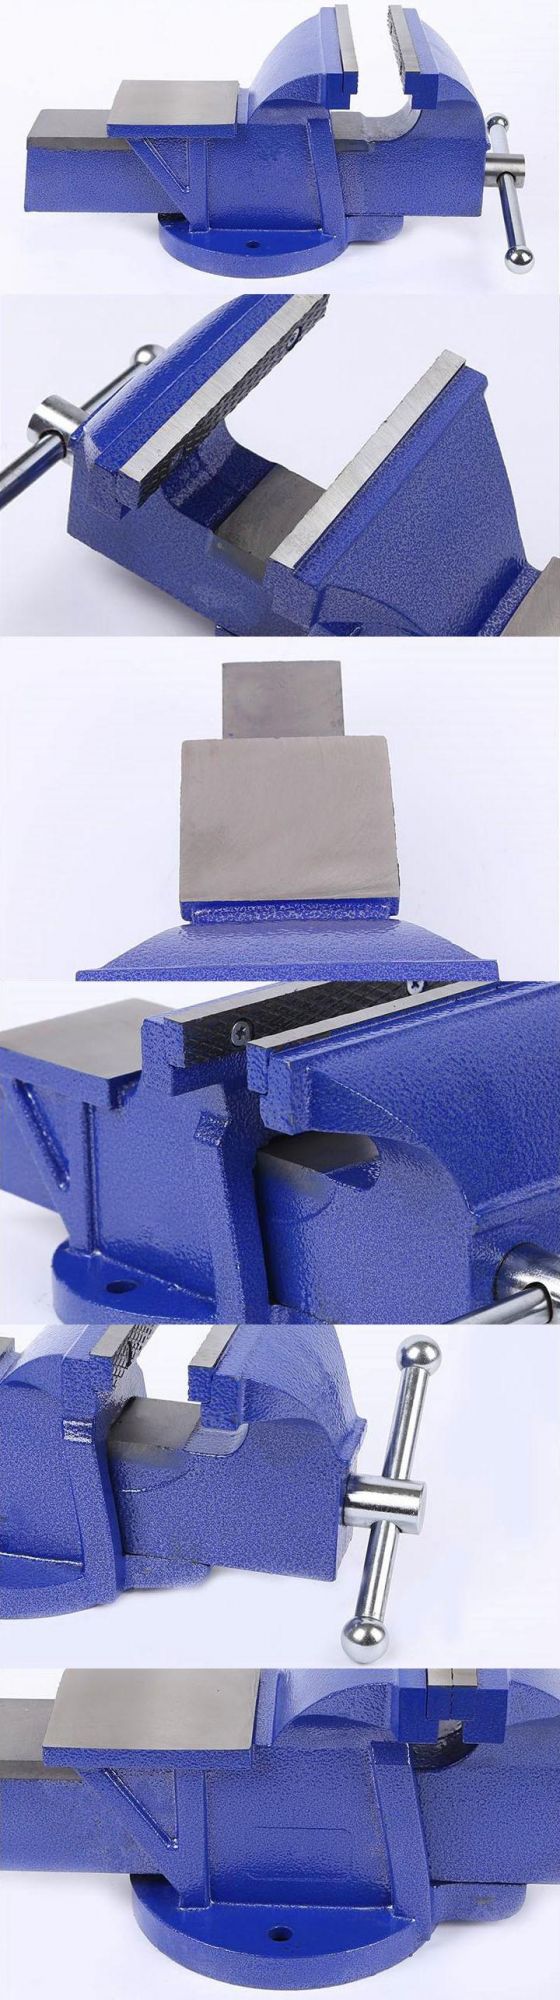 portable Clamp-on Table Mount Bench Vise